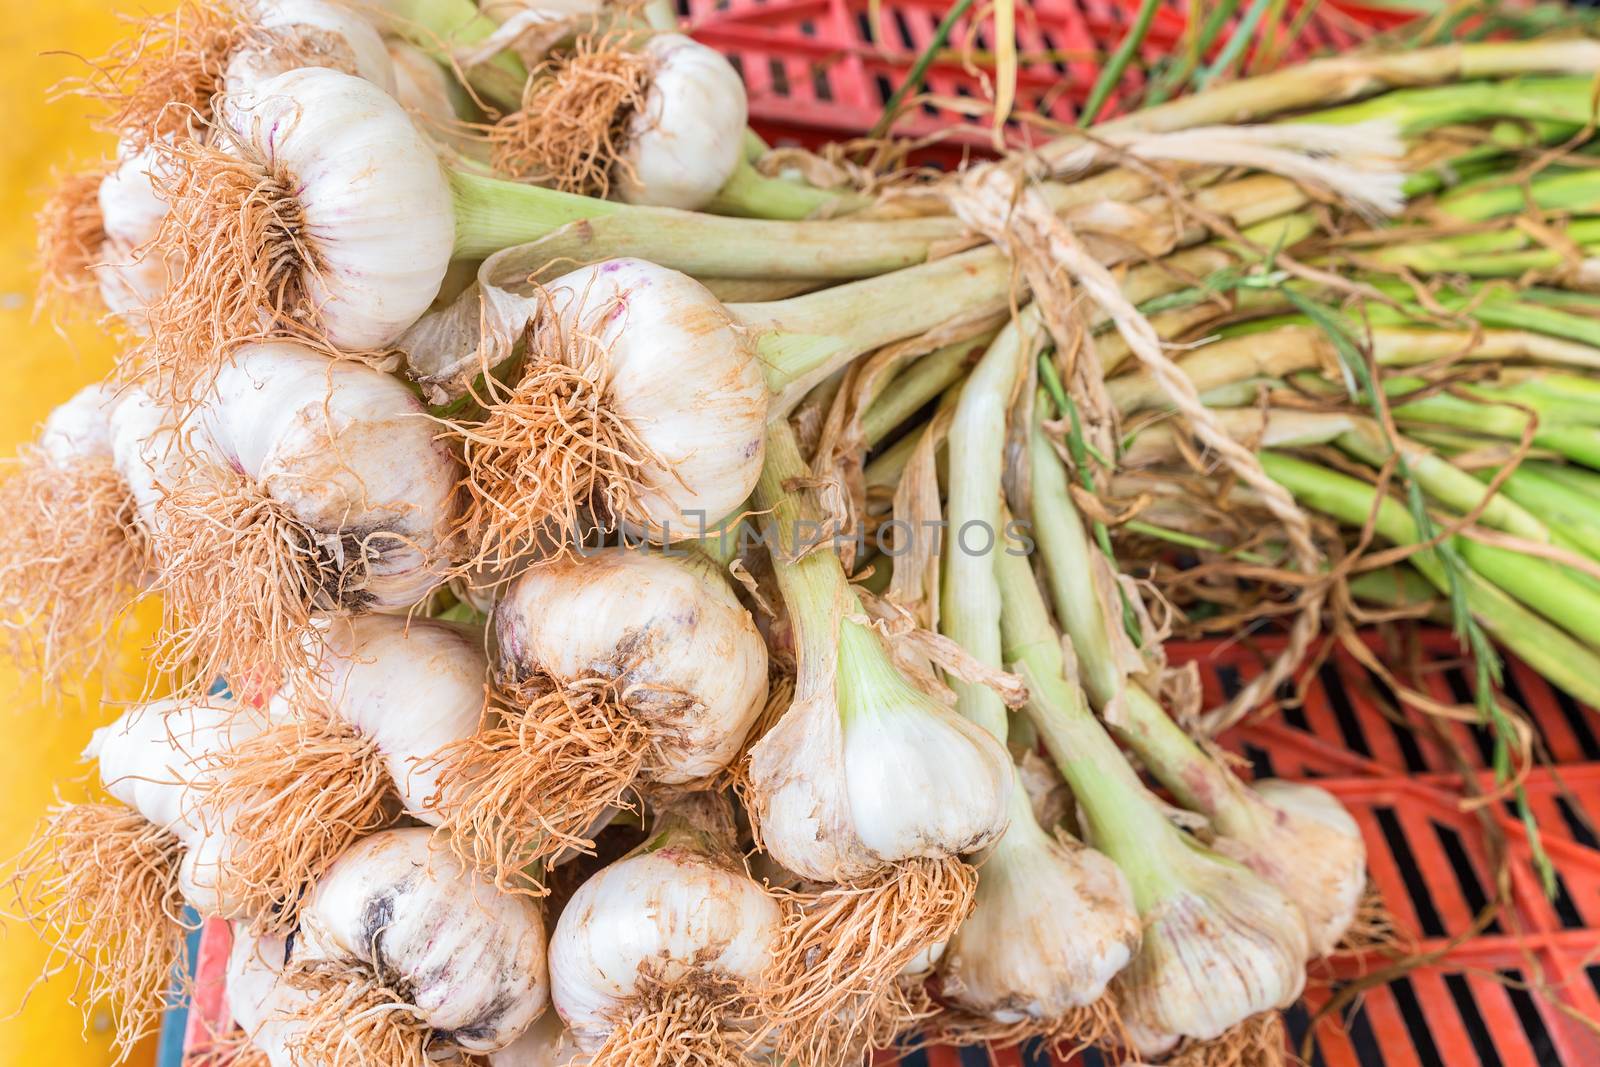 Bunch of garlic bulbs with stalks tied together with a rope